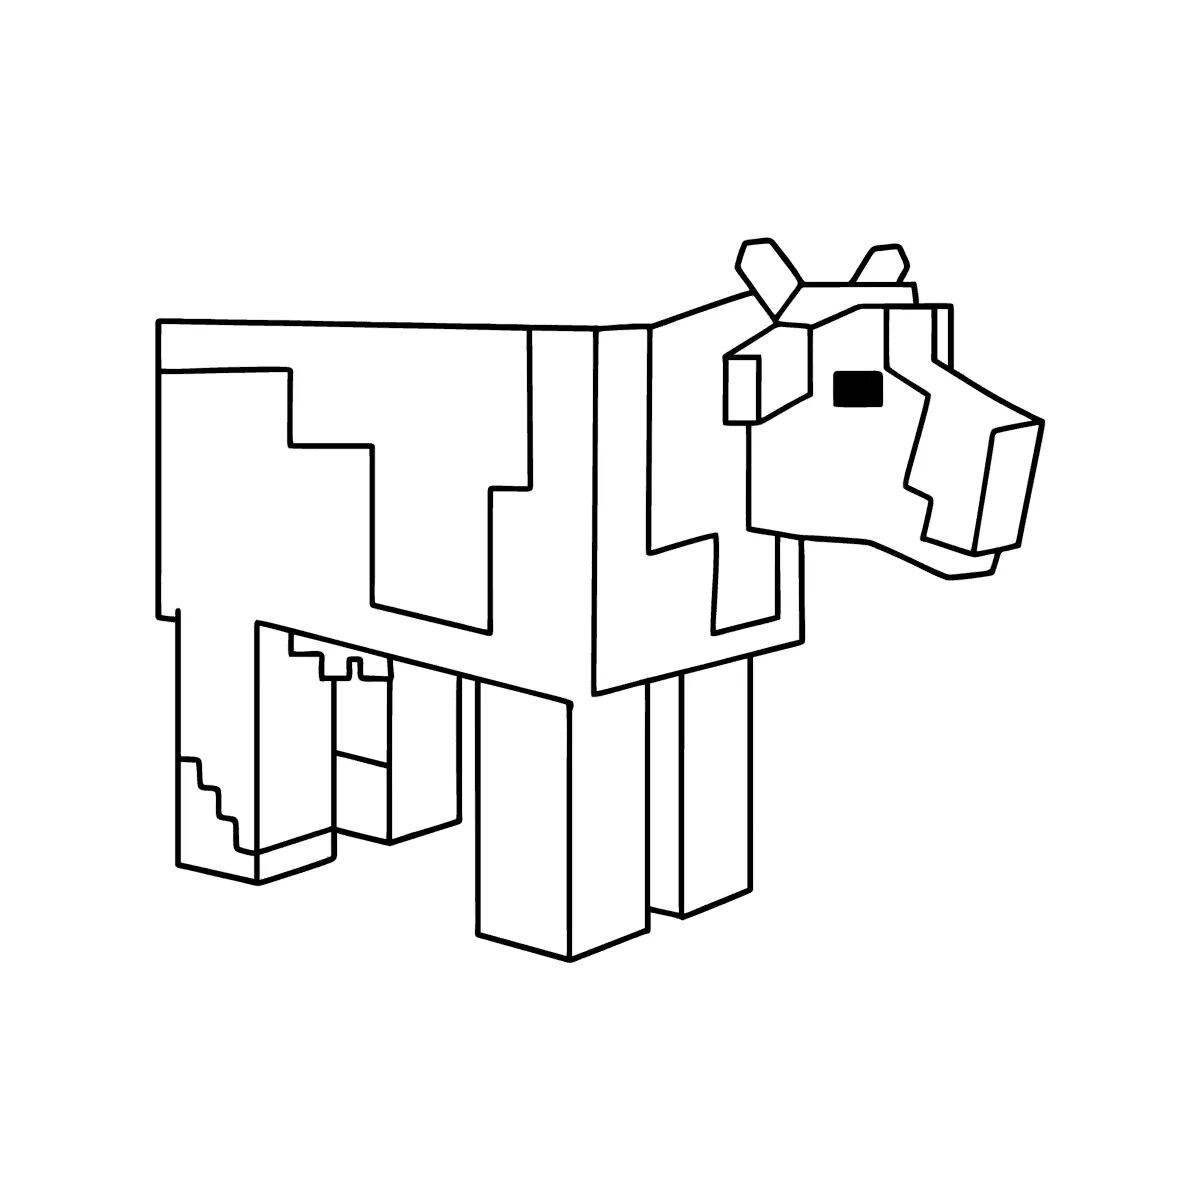 Exquisite minecraft cow coloring page